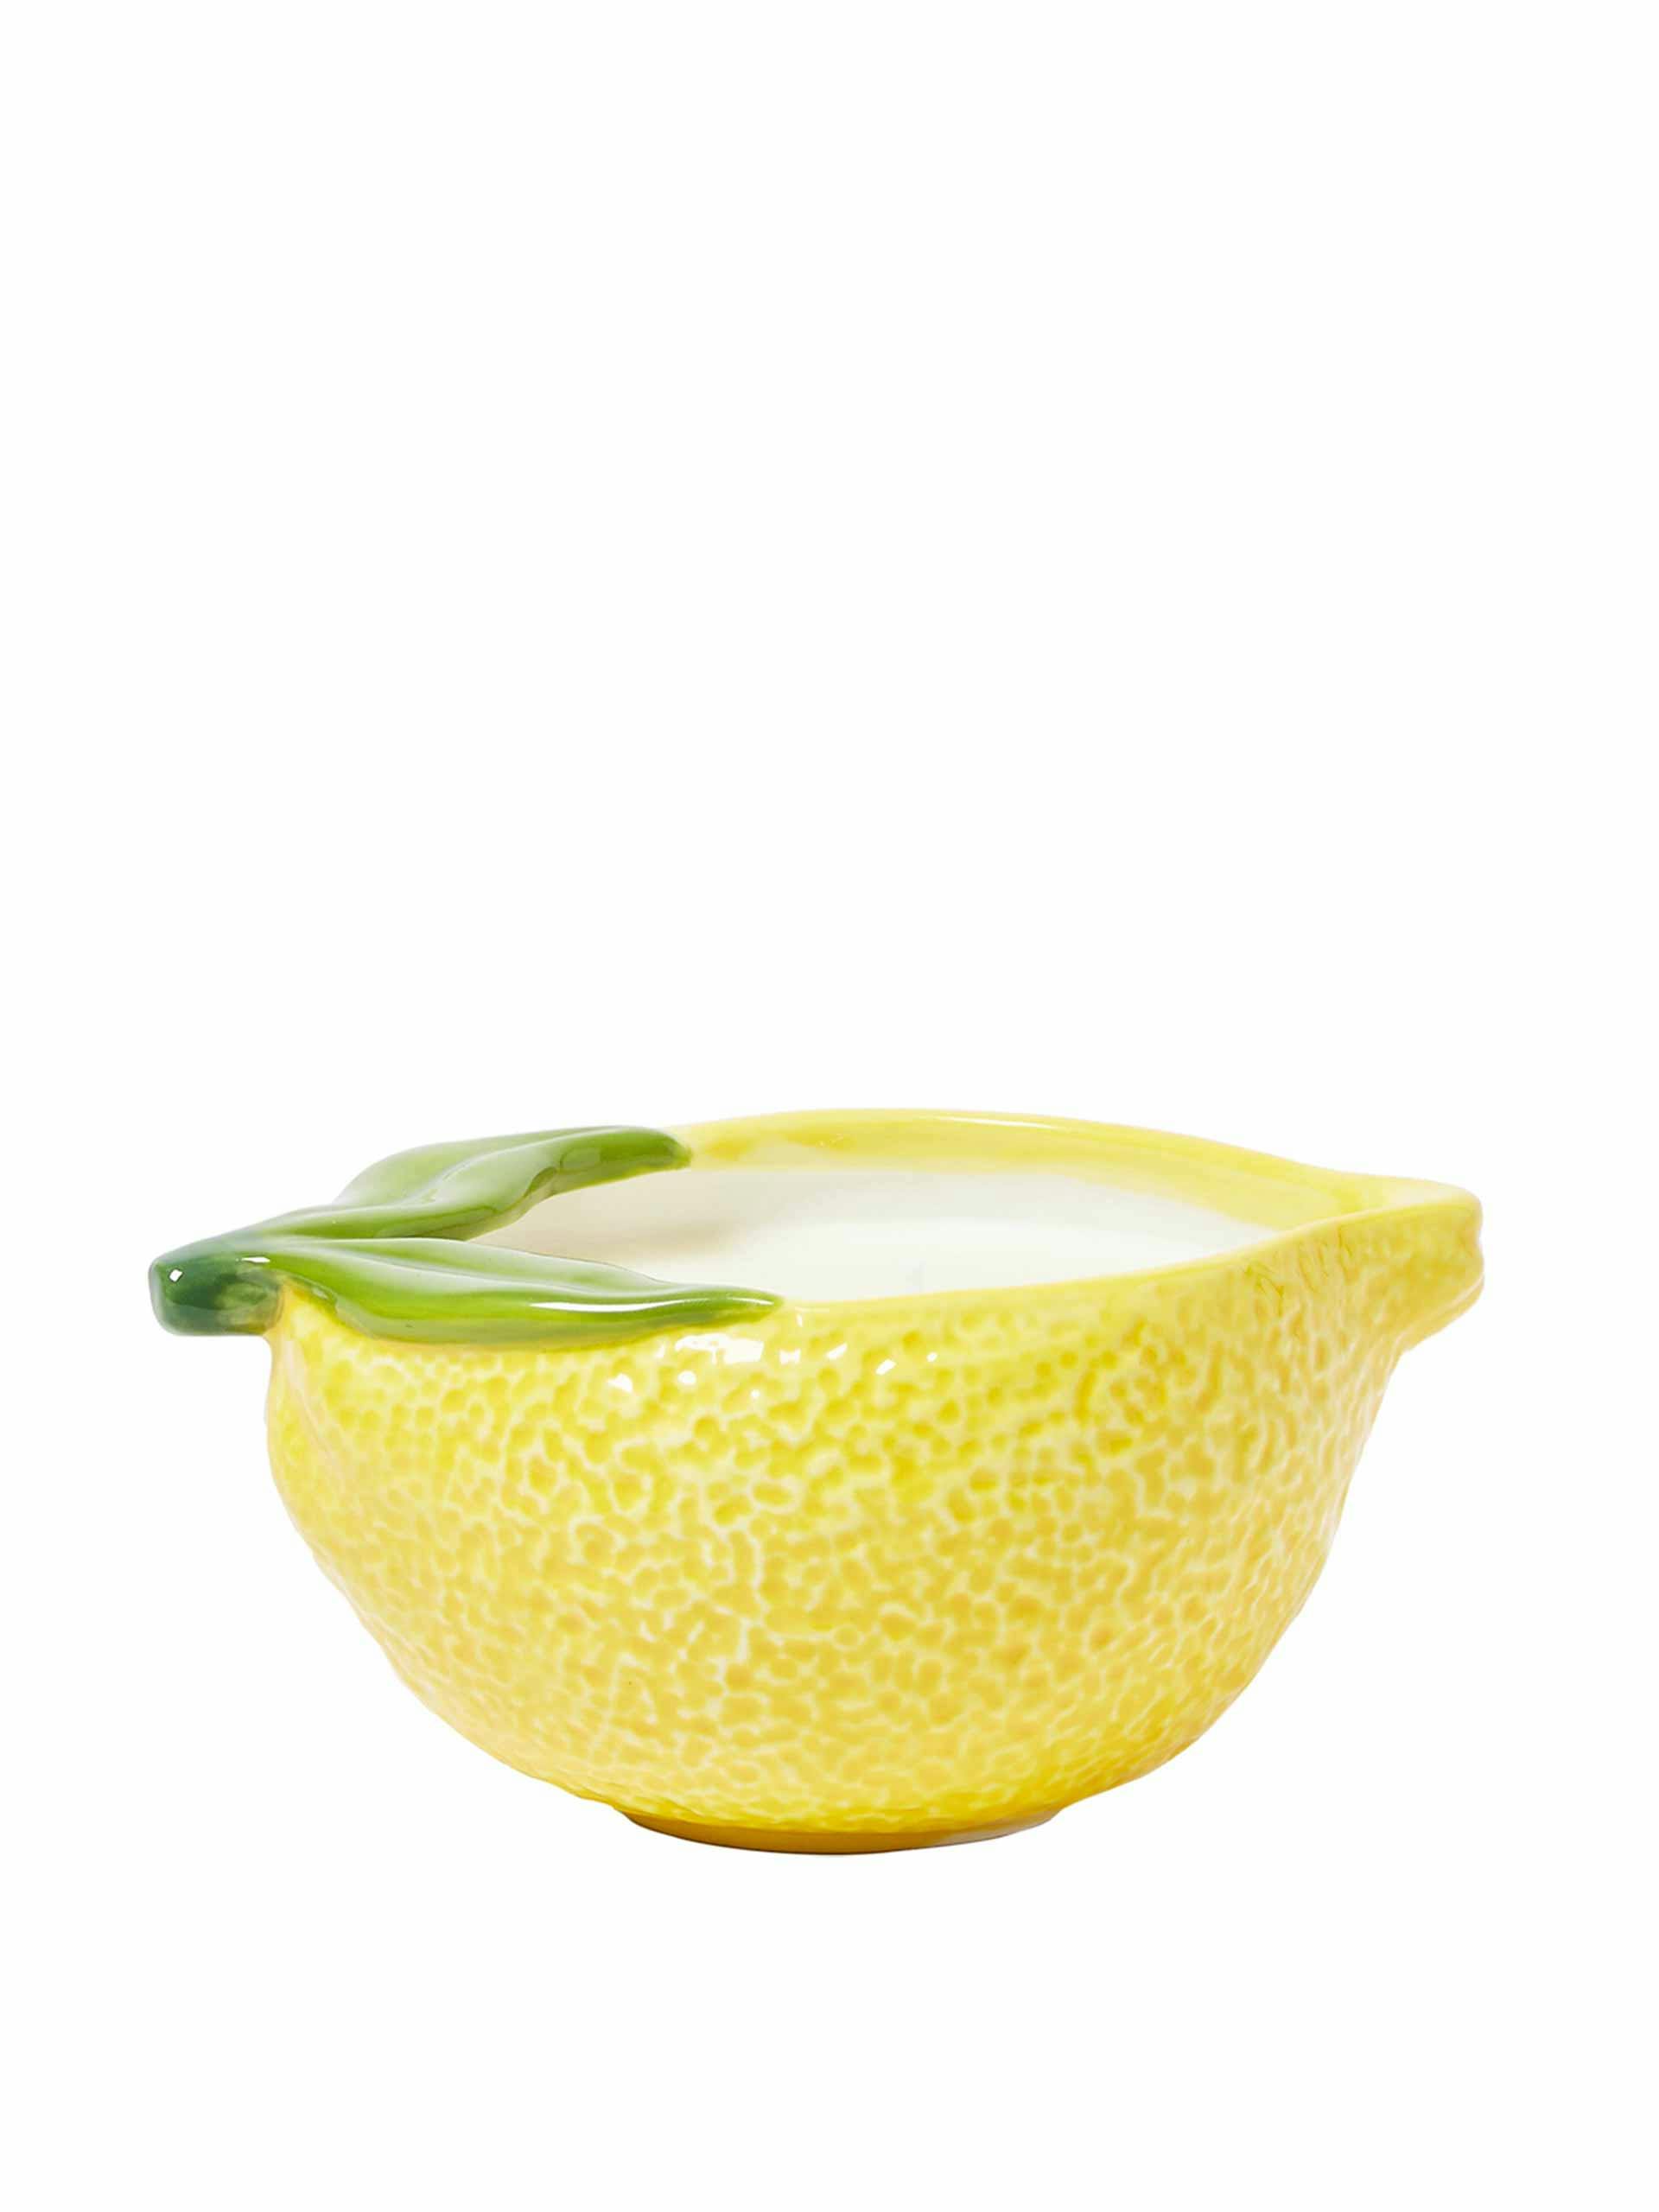 Citrus scented candle